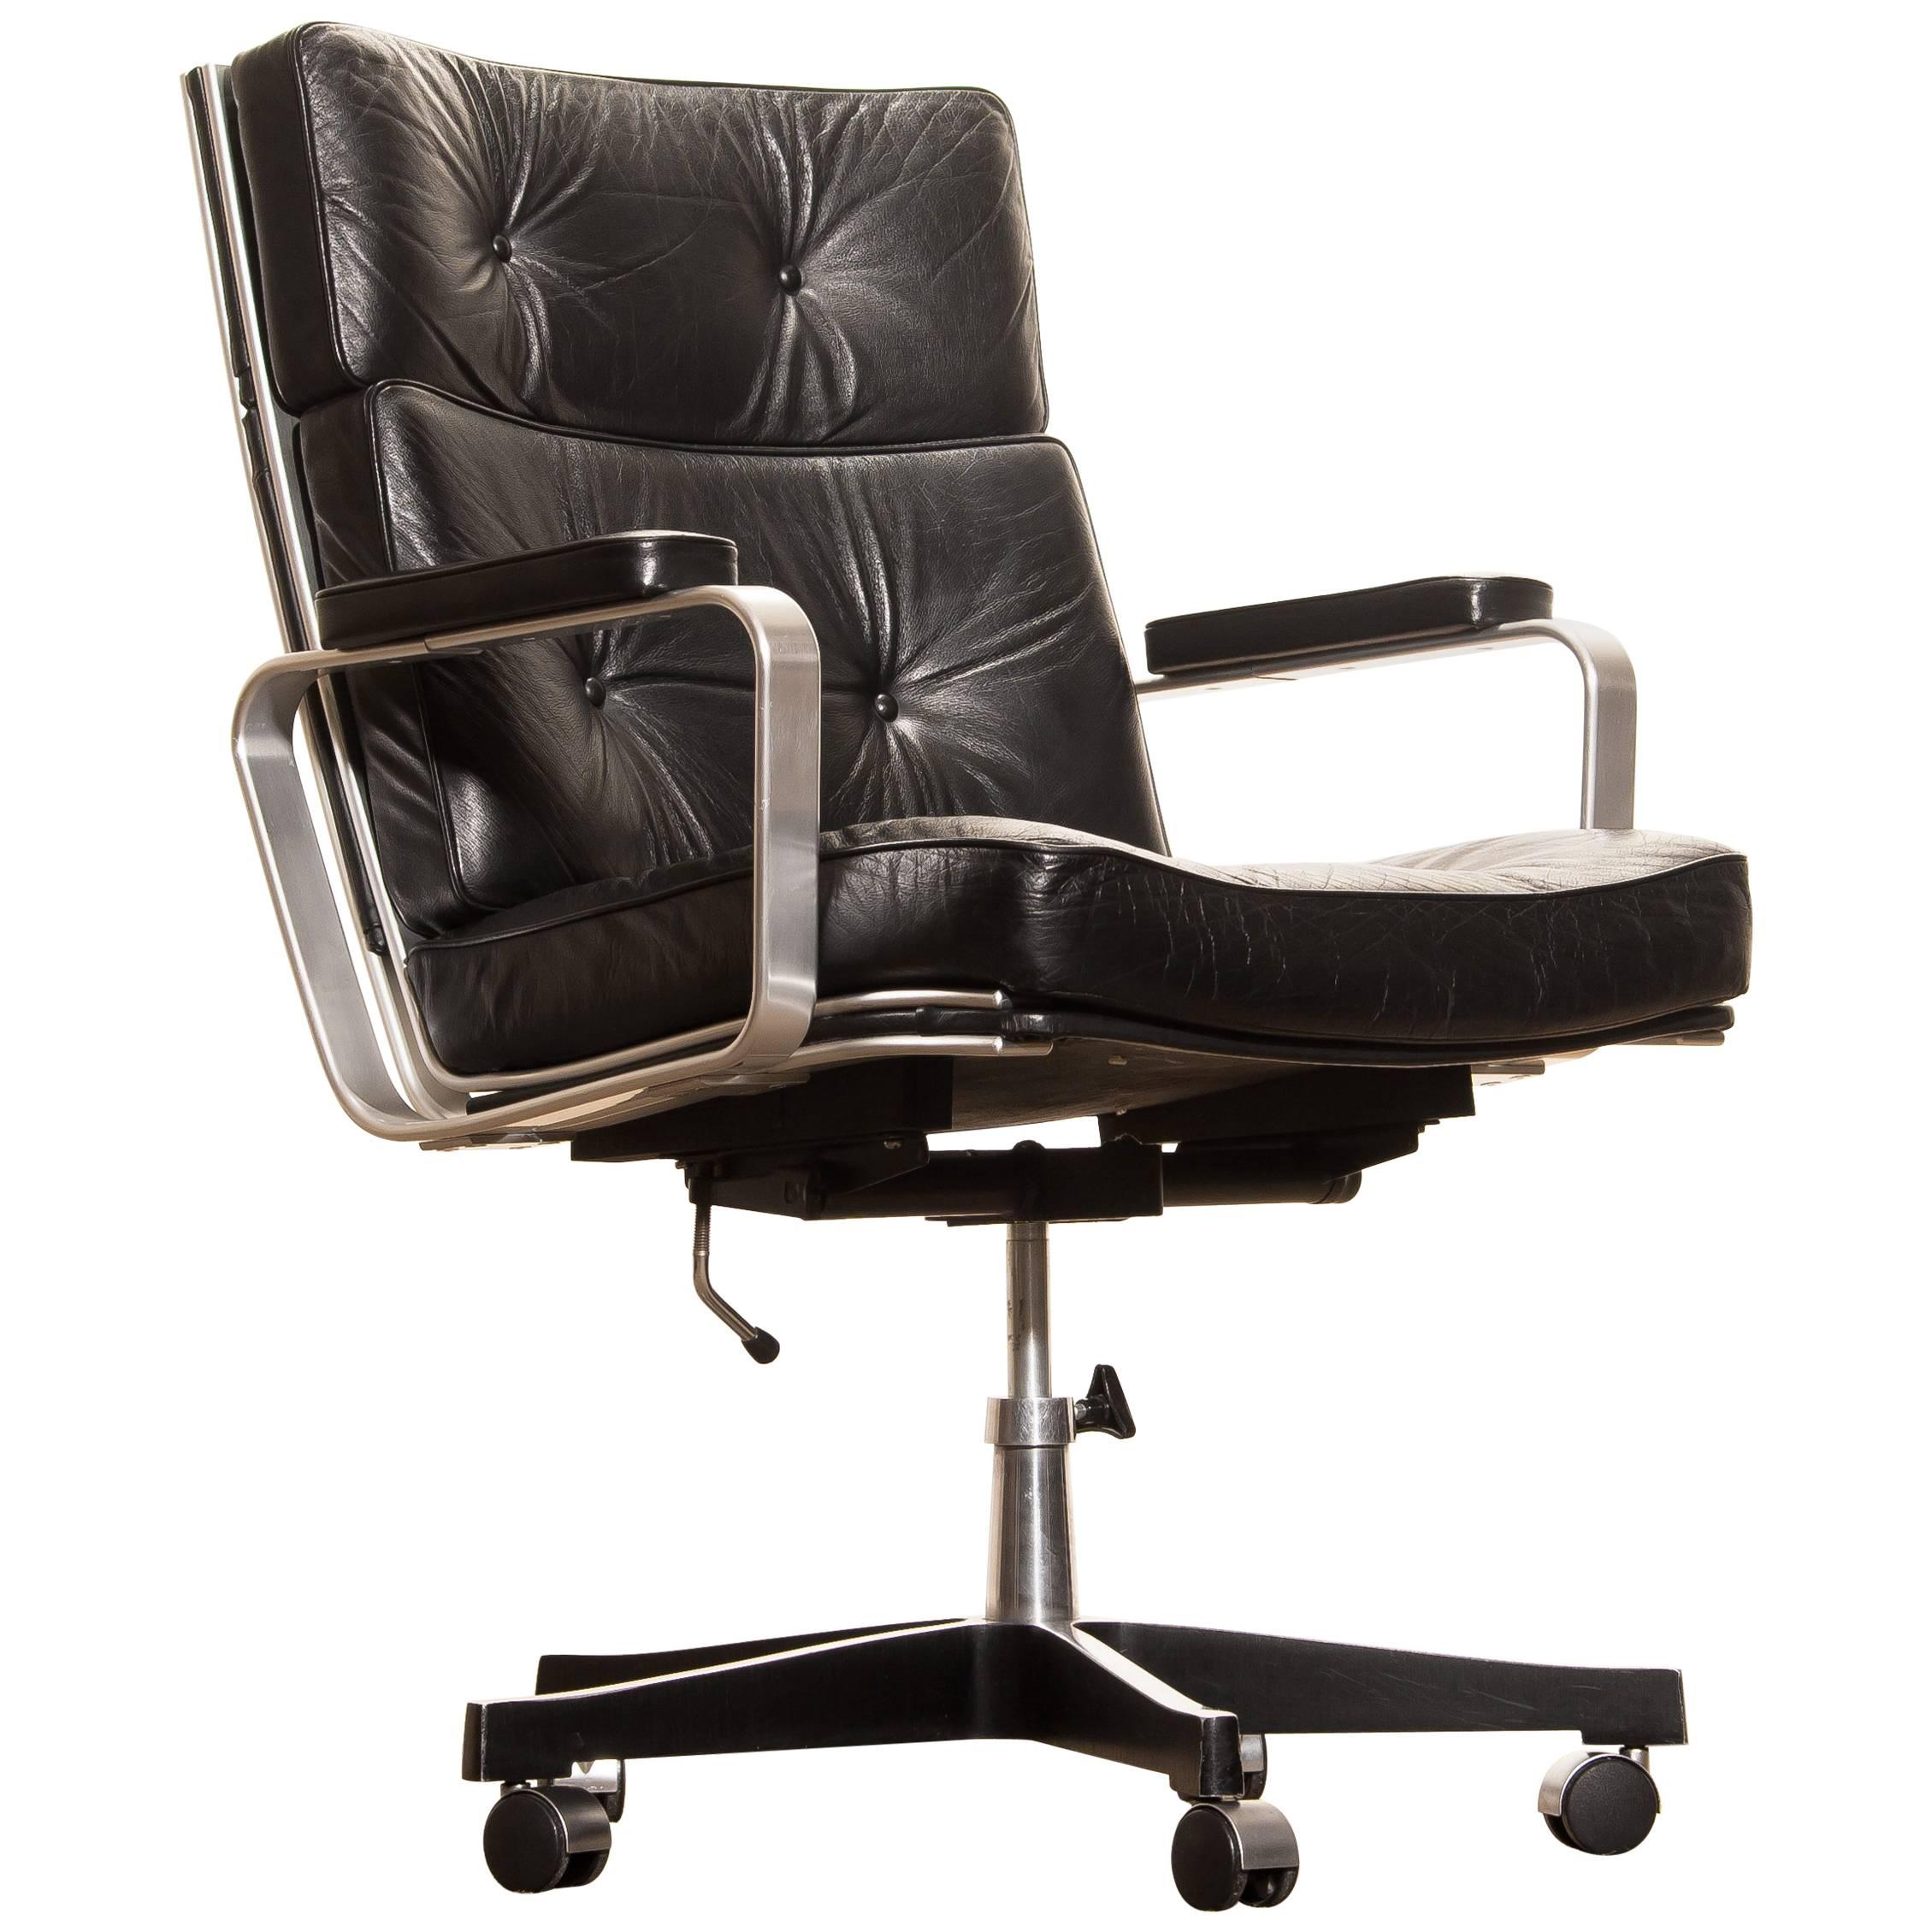 Beautiful adjustable office chair designed by Karl Erik Ekselius for JOC Möbler.
The nice thick solid black leather with an aluminium frame and steel five legs on wheels is a perfect combination.
The chair is extremely comfortable.
With minimal